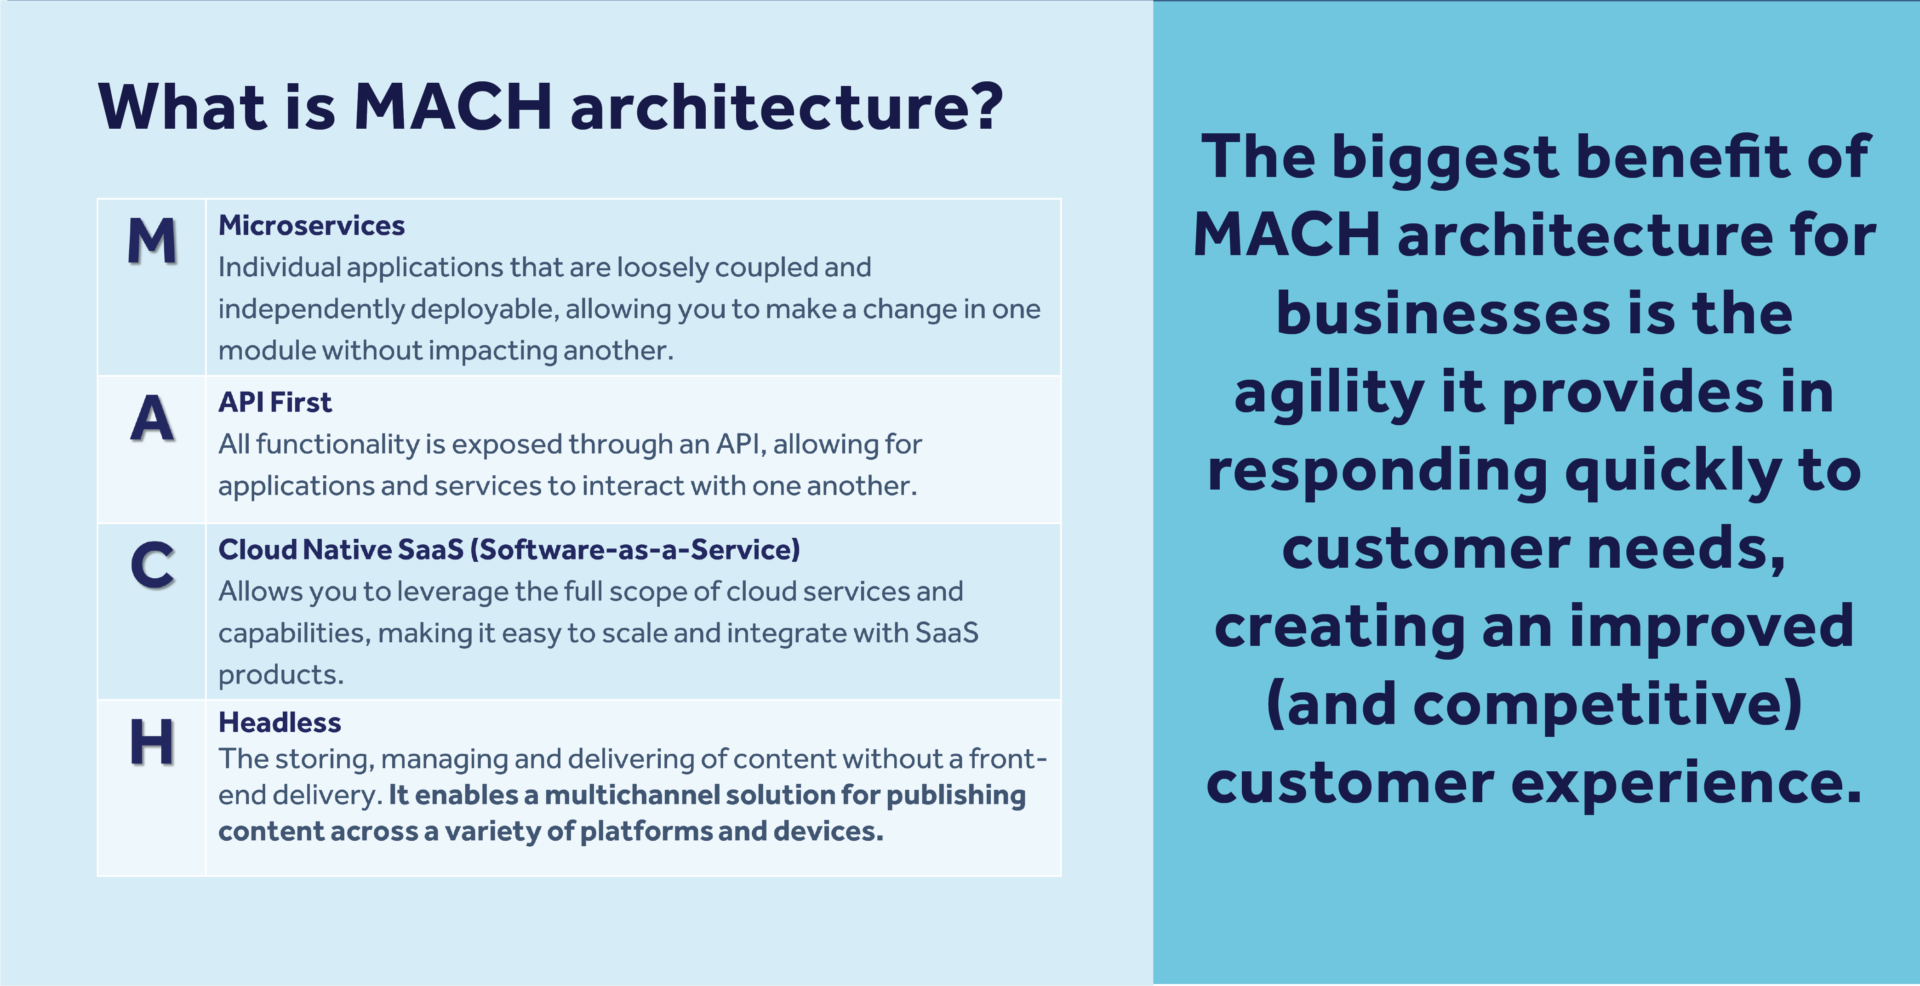 Explanation of MACH architecture